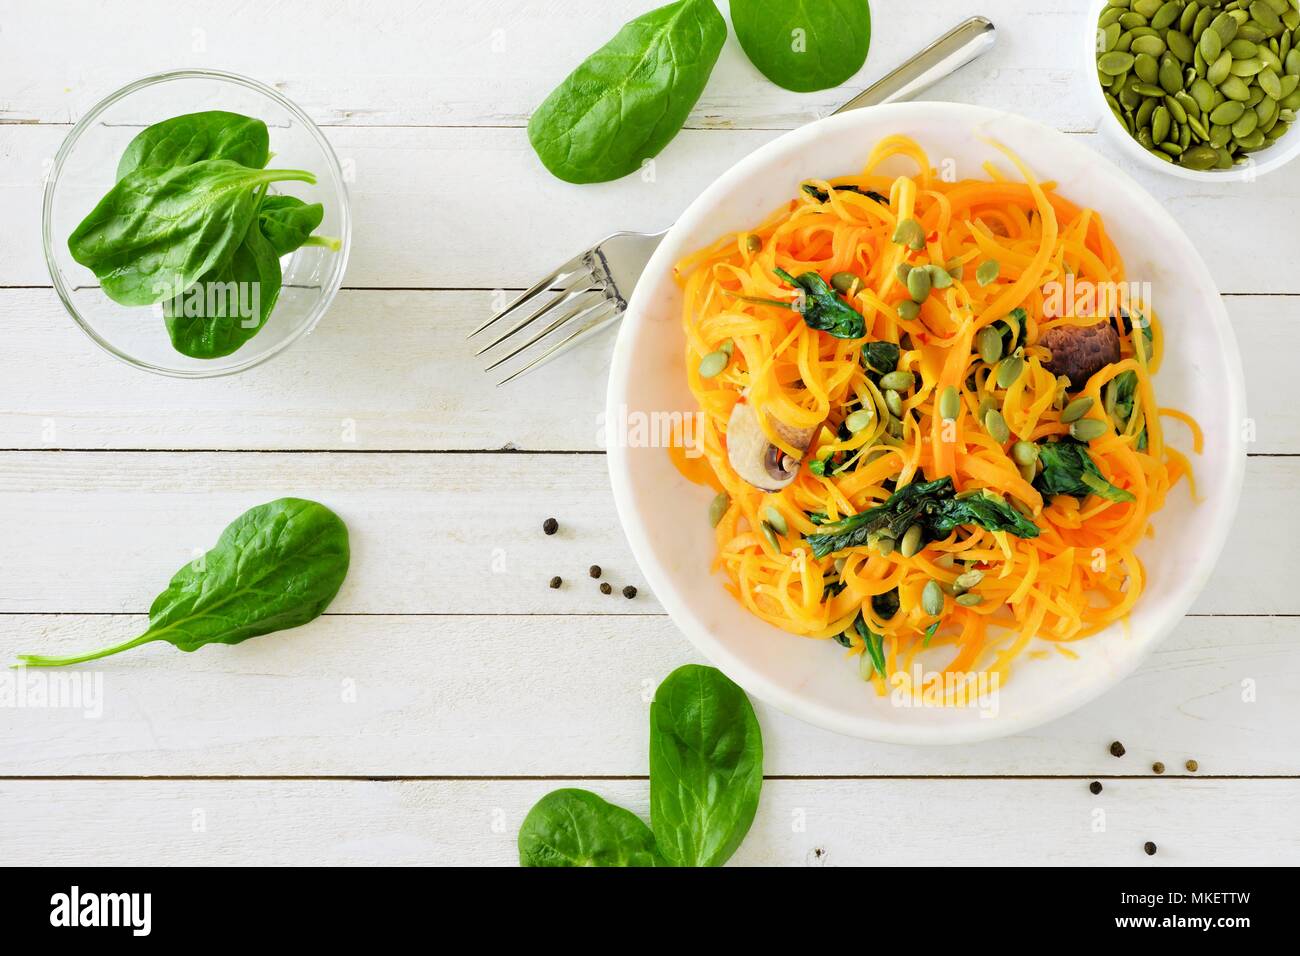 https://c8.alamy.com/comp/MKETTW/butternut-squash-spirilized-noodles-with-spinach-and-pumpkin-seeds-on-white-wood-background-healthy-eating-concept-top-view-table-scene-MKETTW.jpg